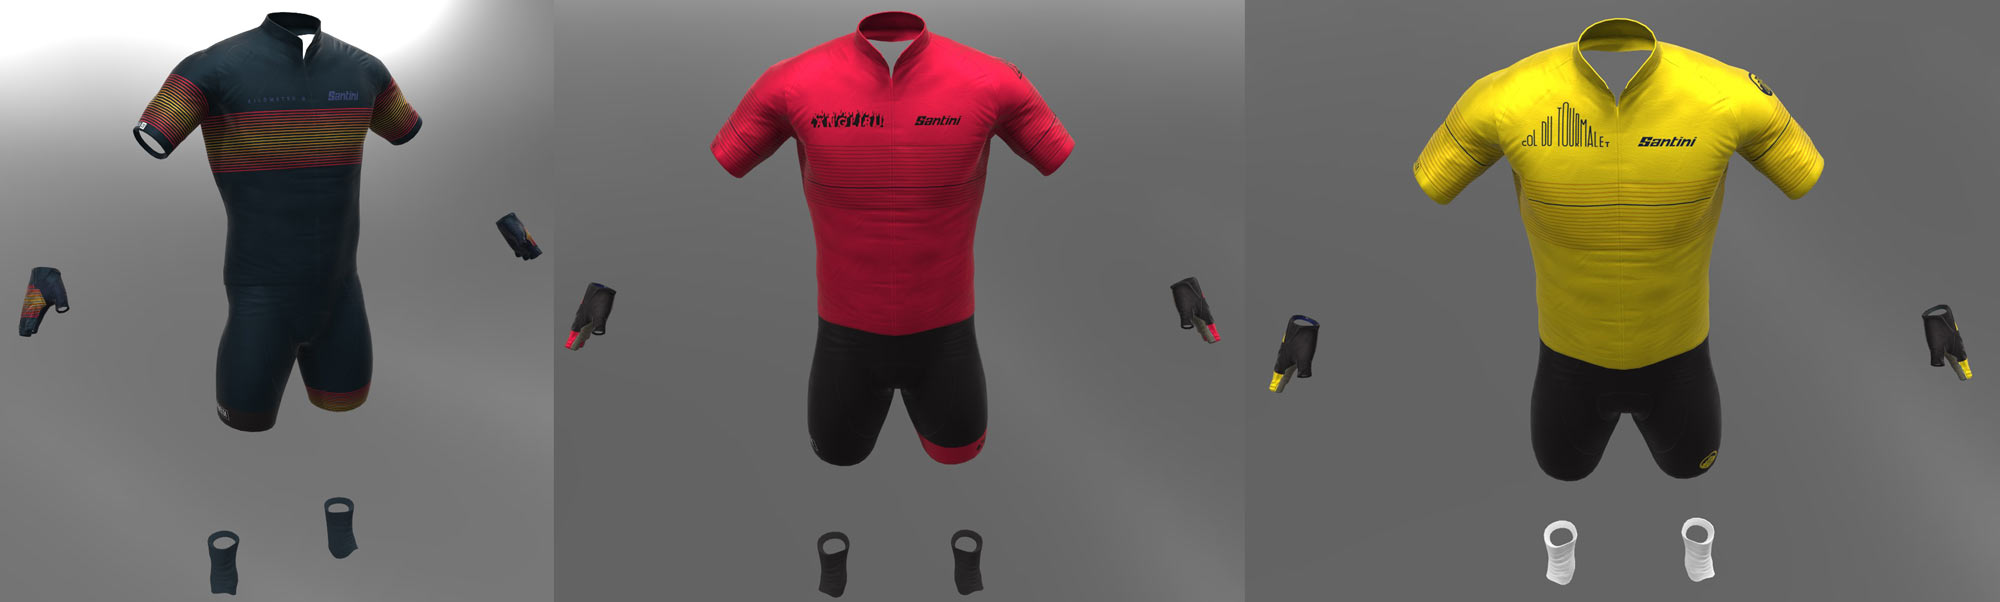 in game avatar jerseys from Rouvy La Vuelta challenge